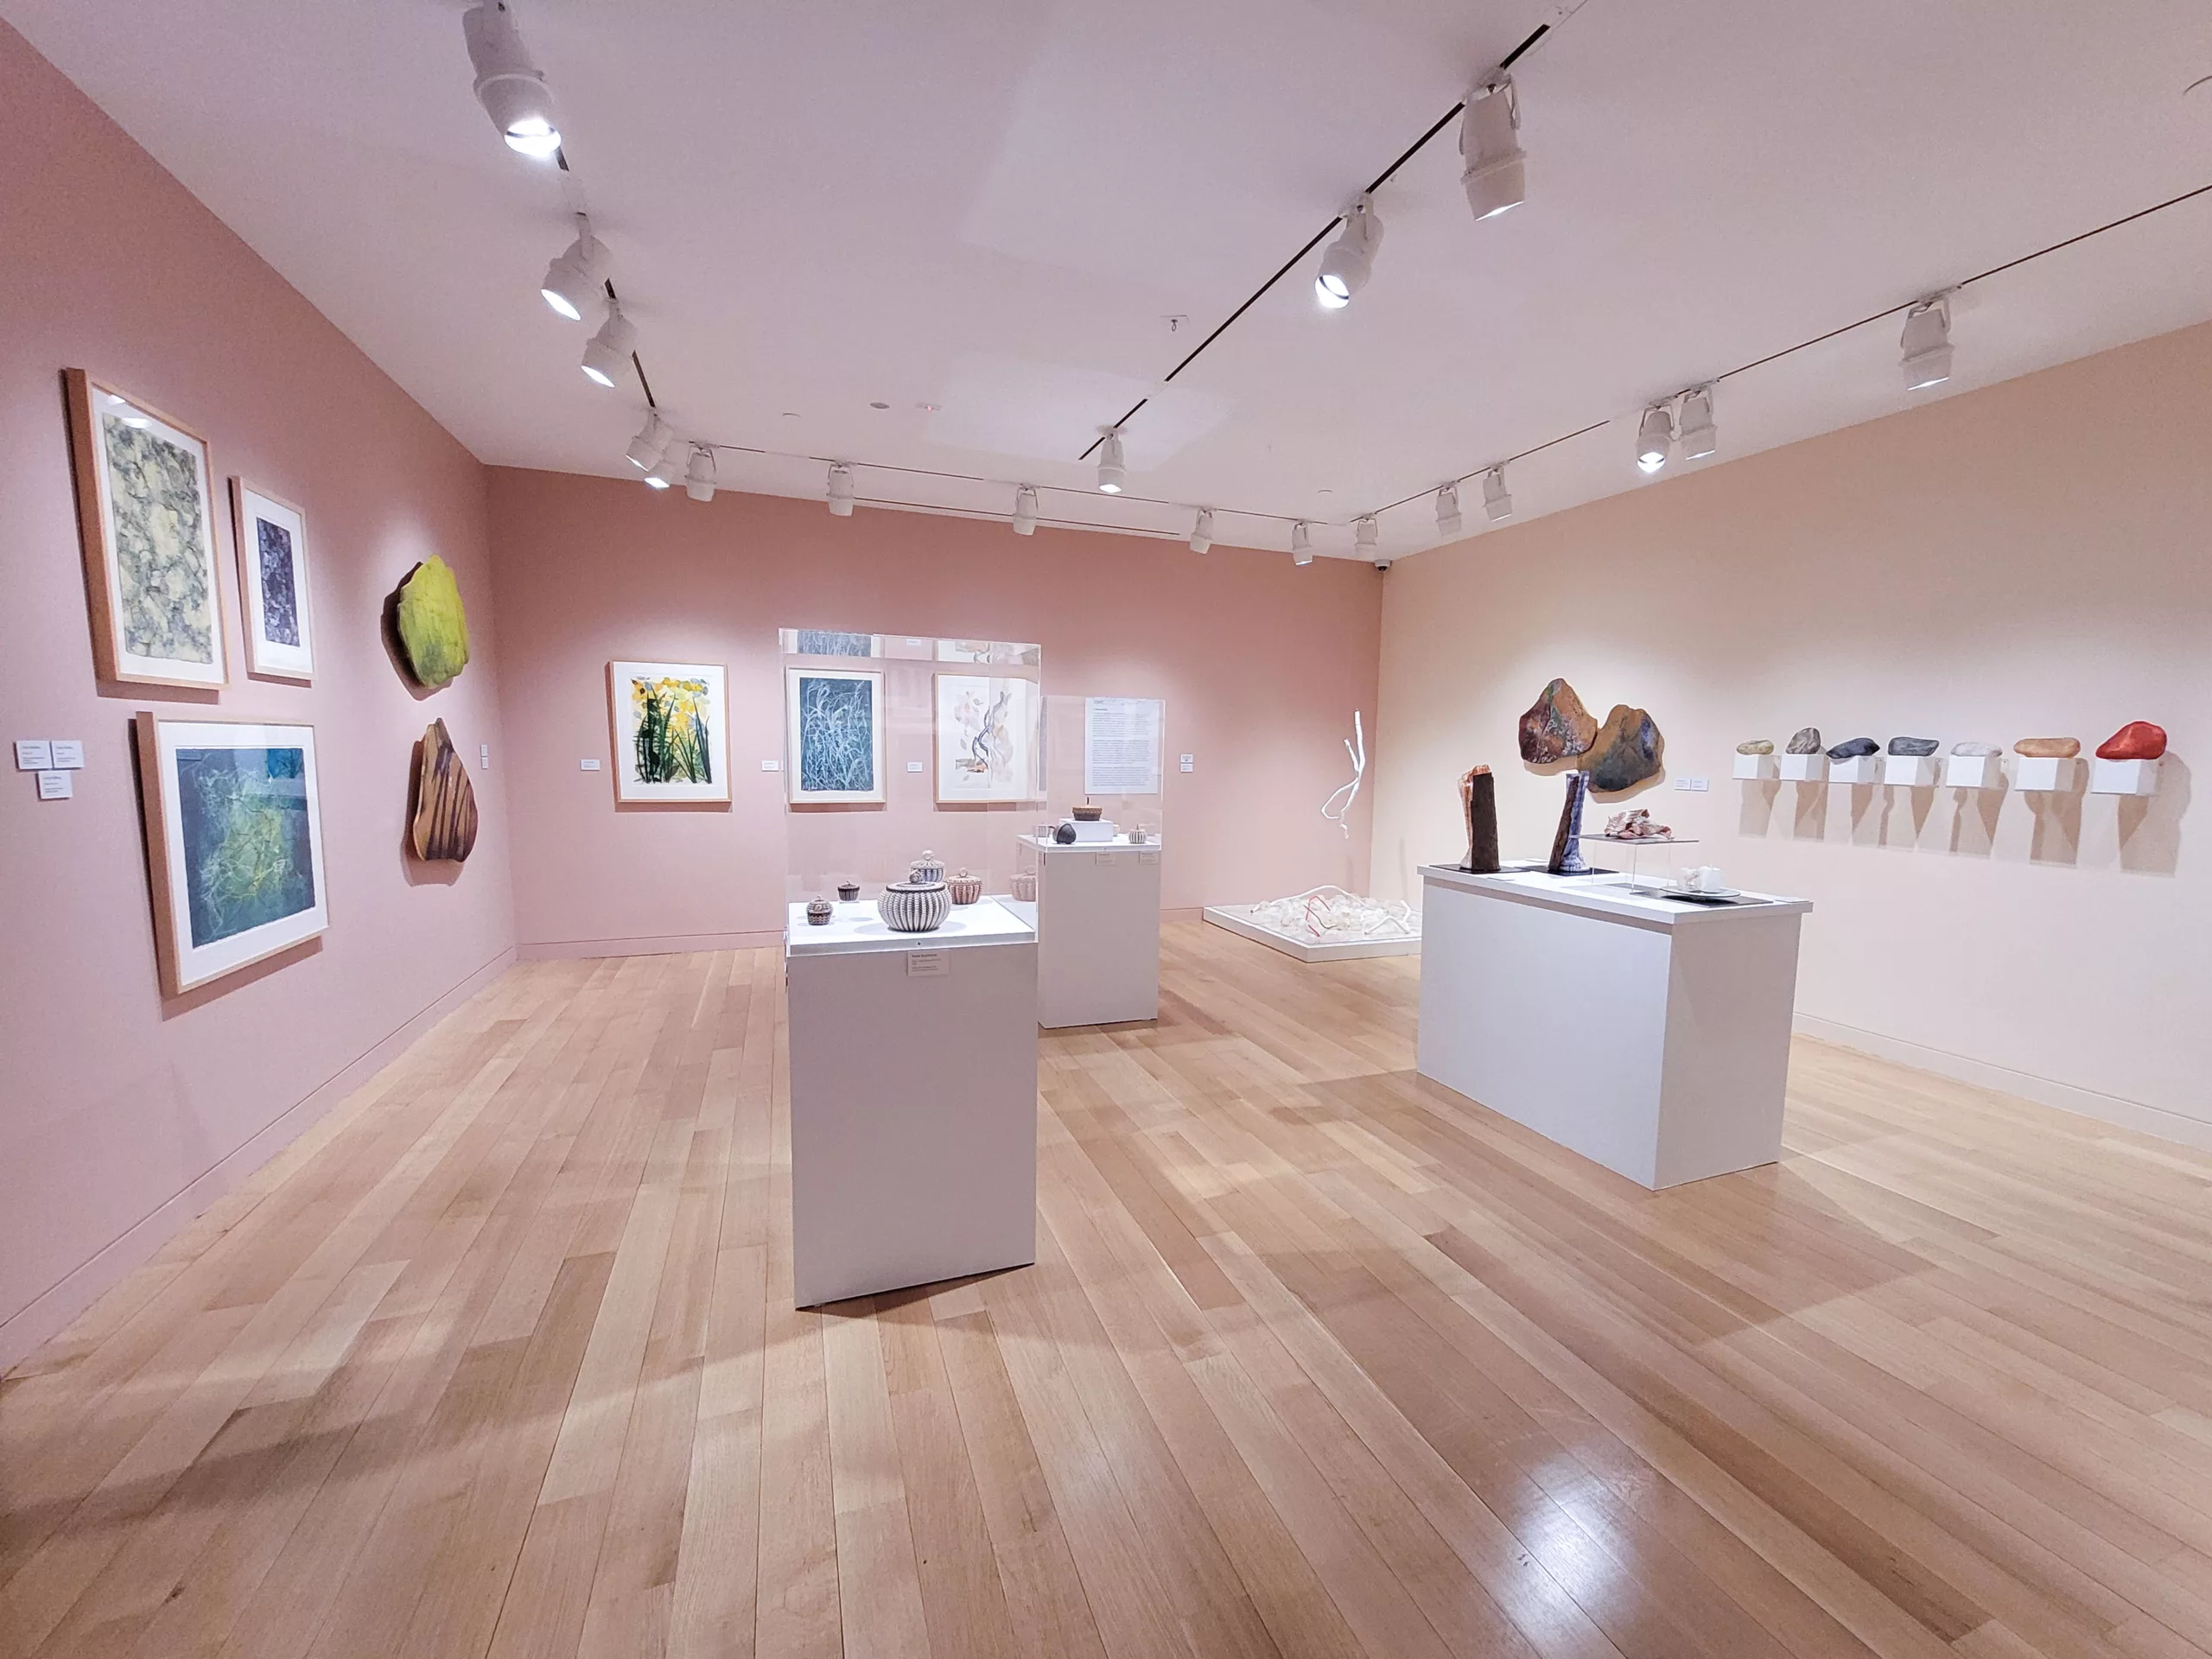 Photo of a gallery installation with peach and tan walls. There is artwork hanging on each wall, and three pedestals in the center holding artwork.